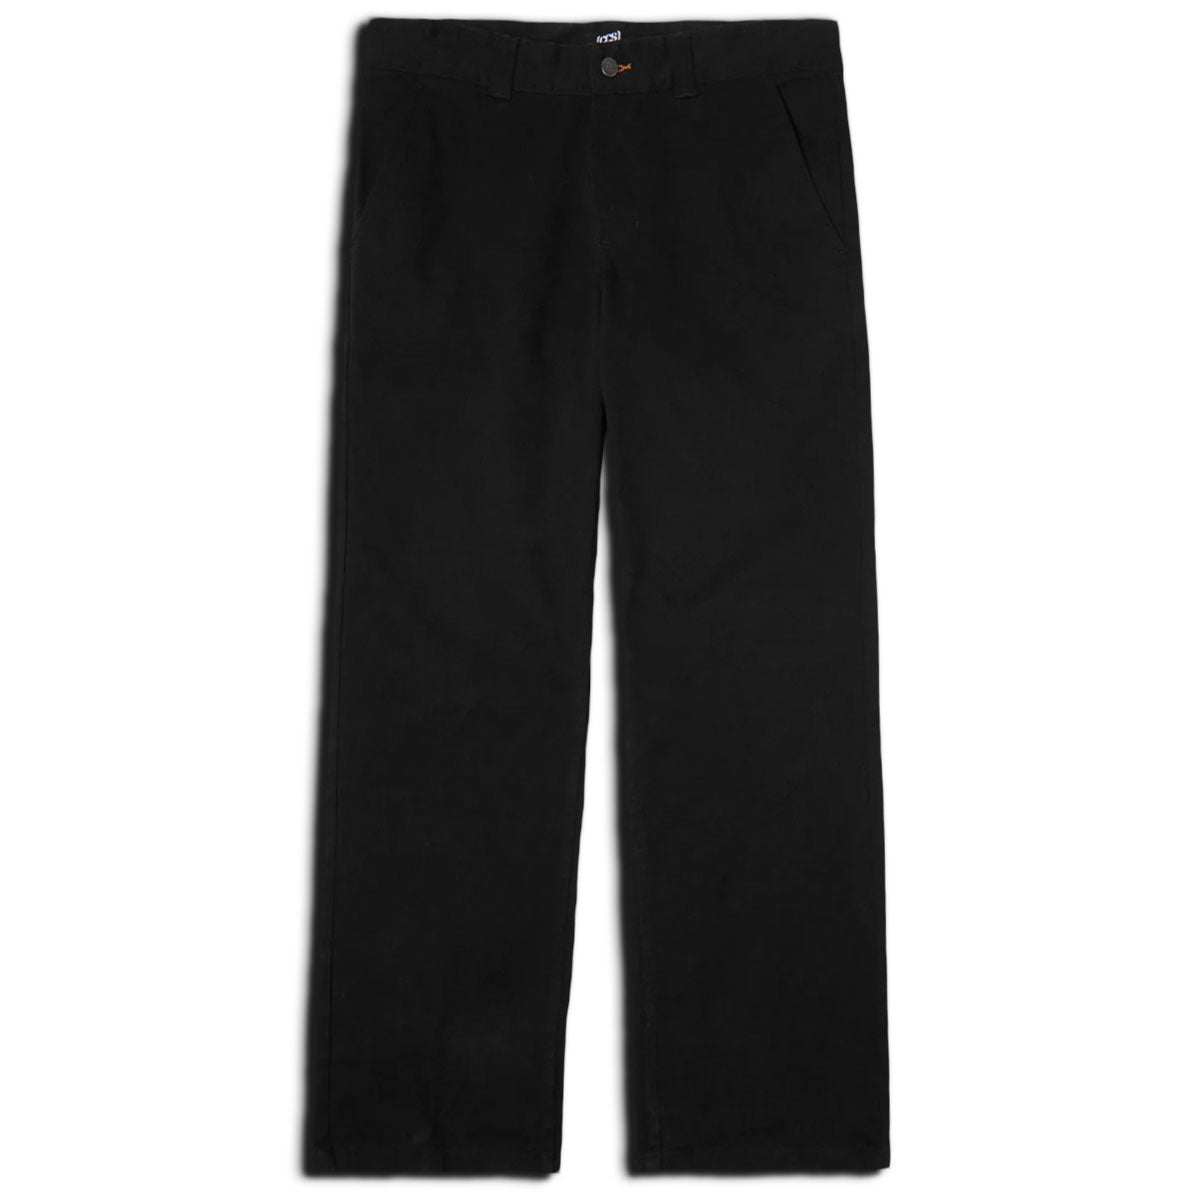 CCS Standard Plus Relaxed Chino Pants - Black